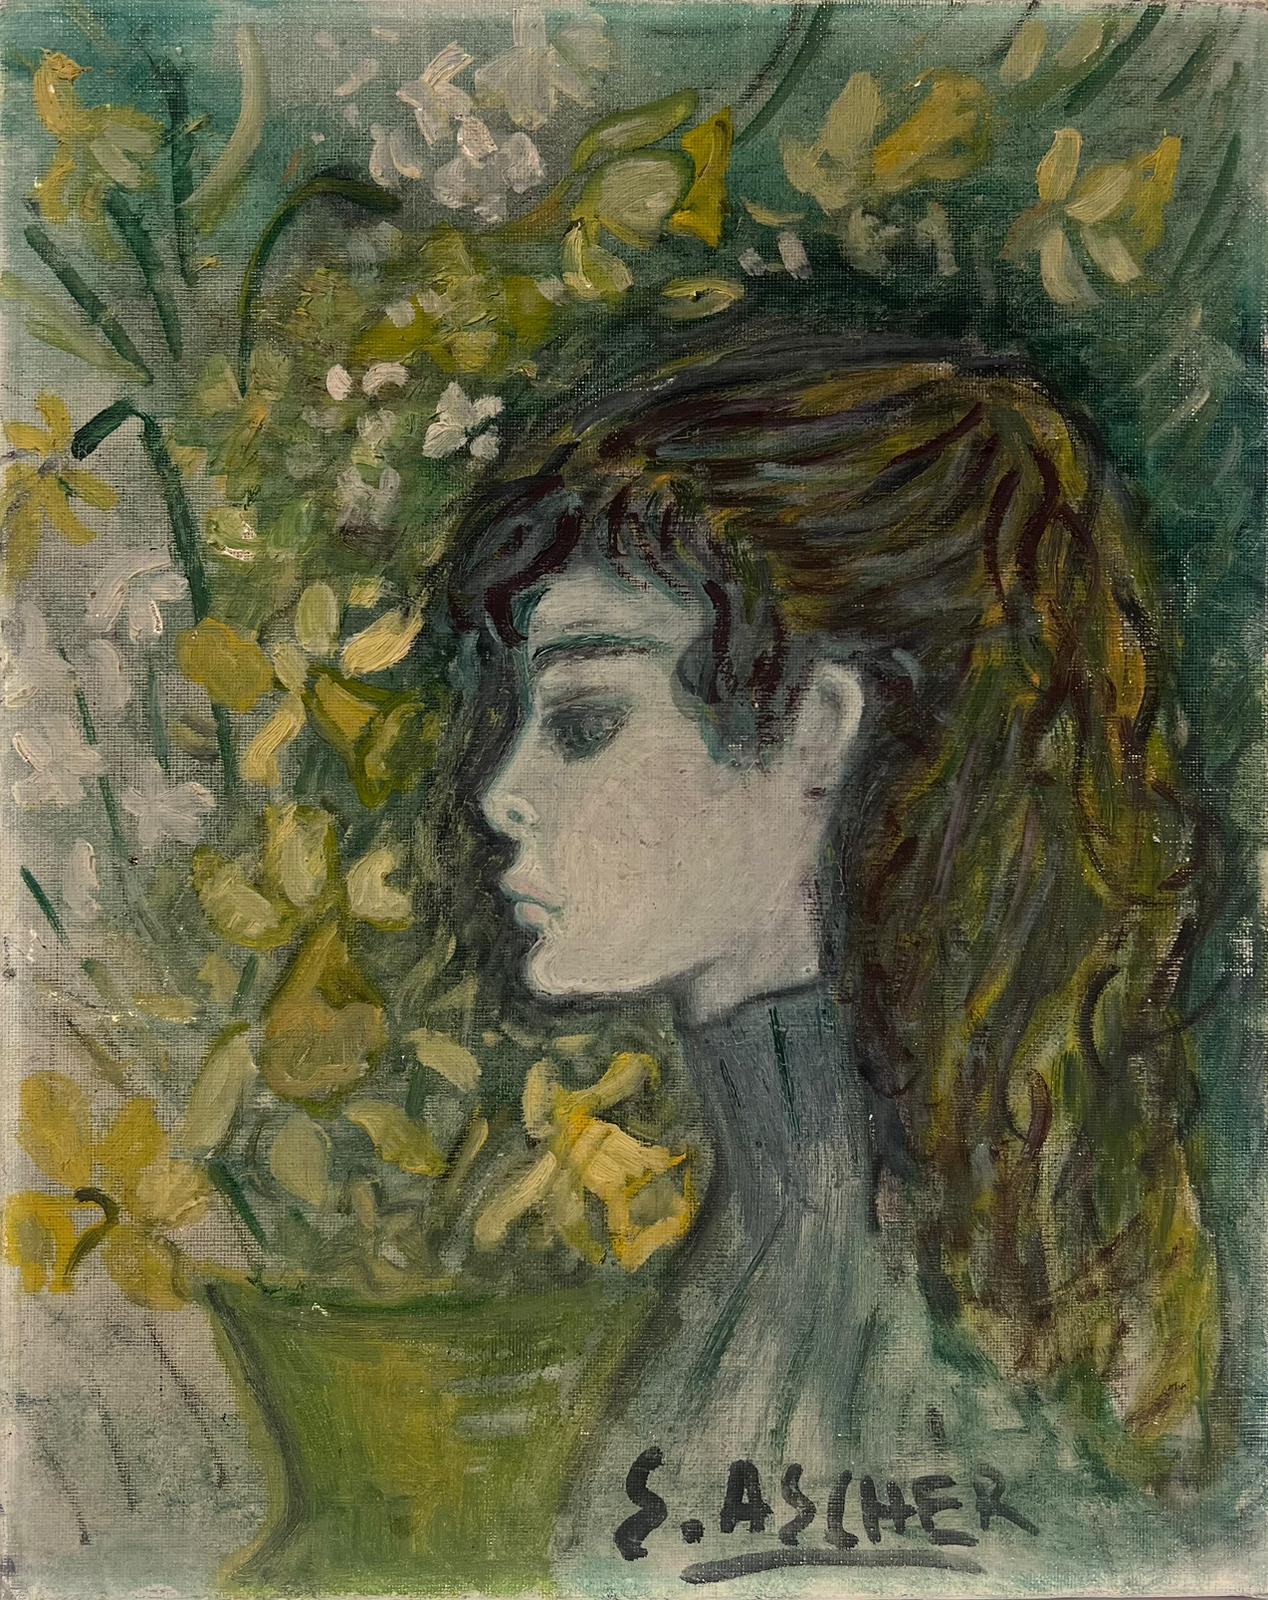 S.Ascher Figurative Painting - Mid 20th Century French Modernist Portrait of a Young Lady Green & Yellow Colors